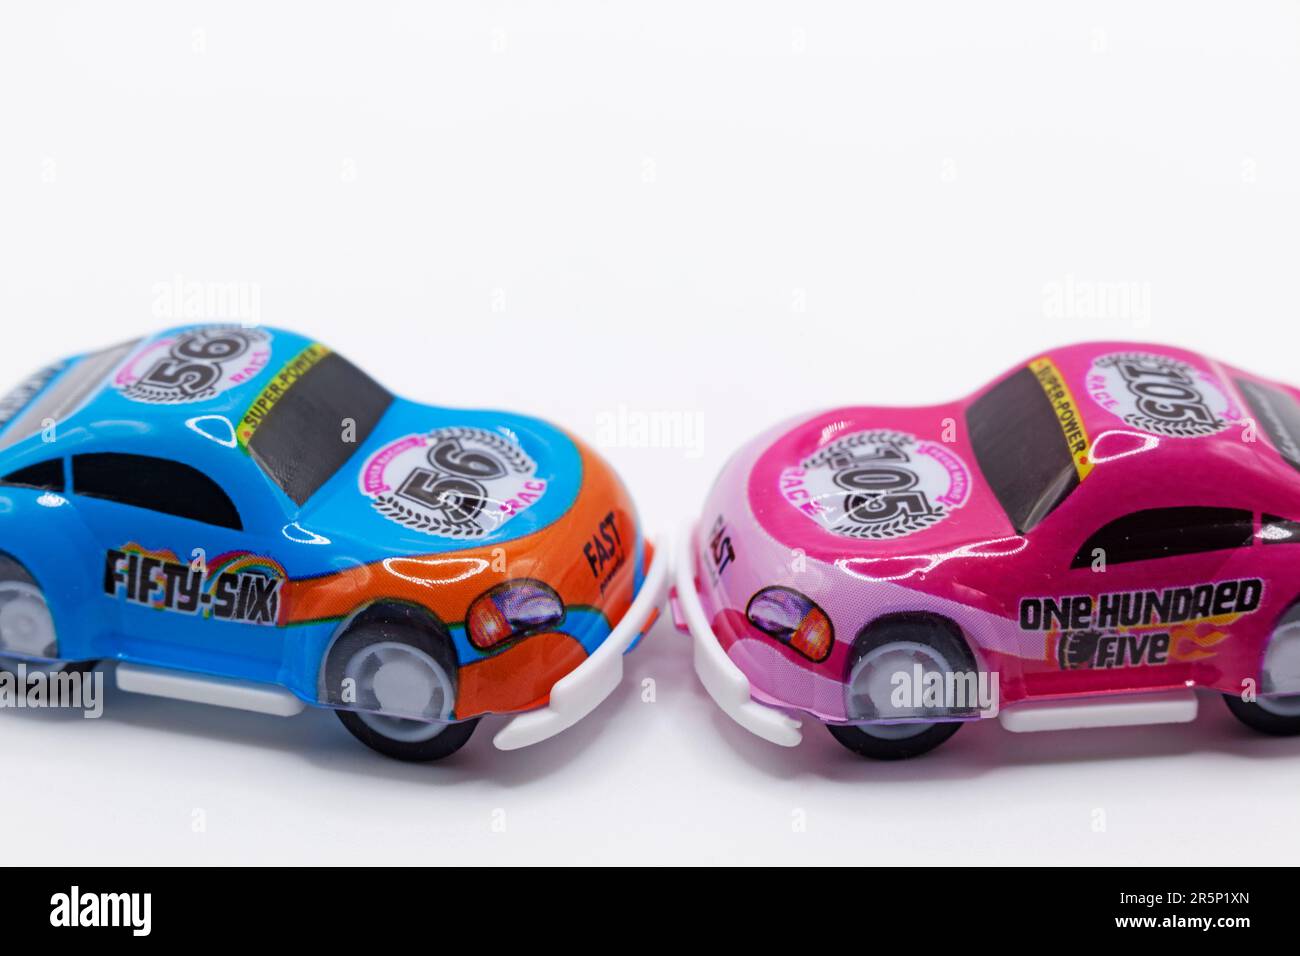 Umea, Norrland Sweden - March 23, 2023: two toy cars on white background collide Stock Photo